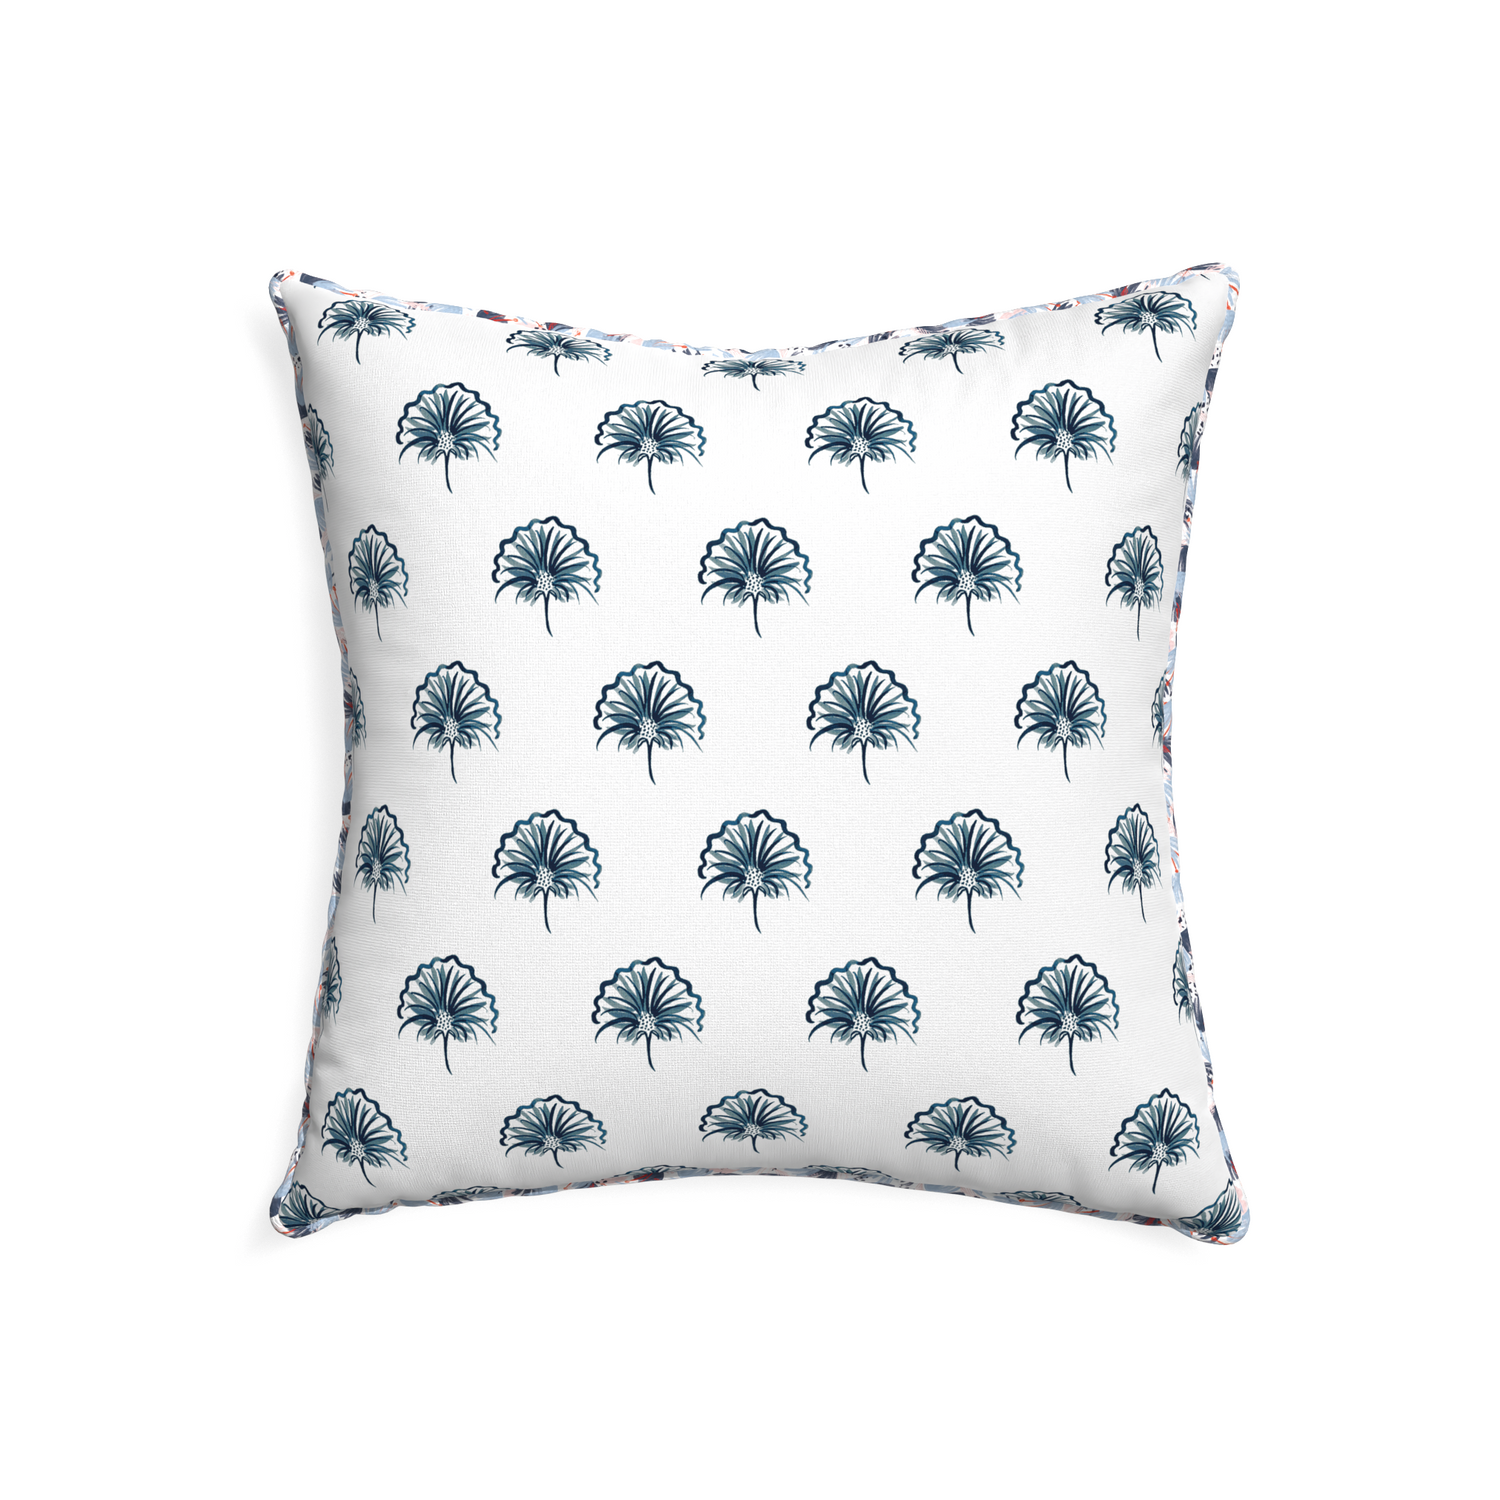 22-square penelope midnight custom floral navypillow with e piping on white background